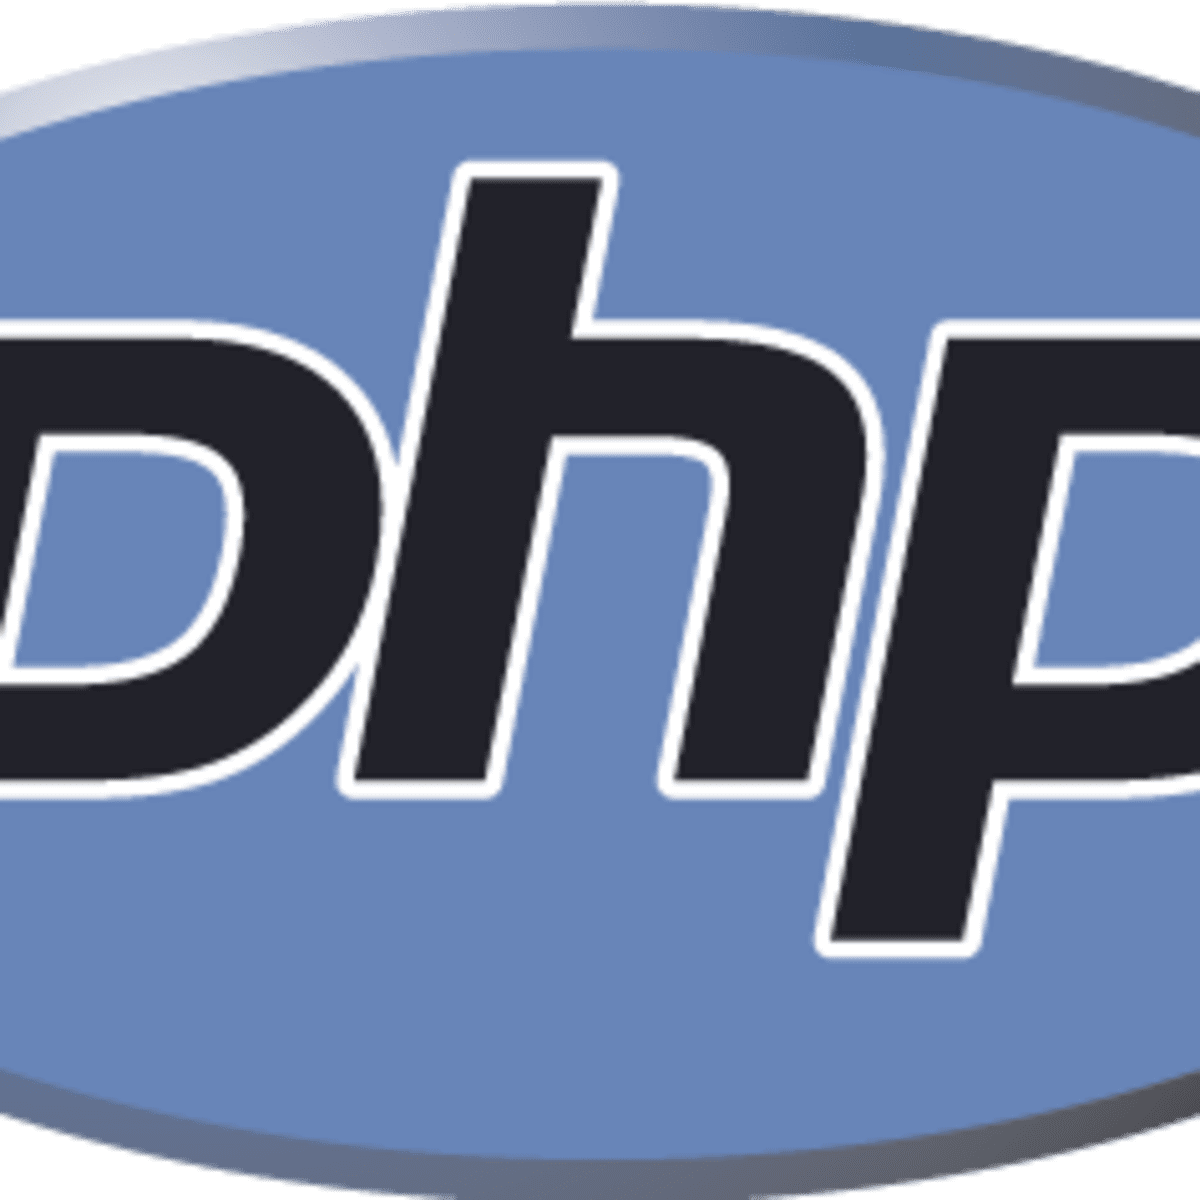 php editor dasboar for mac free download